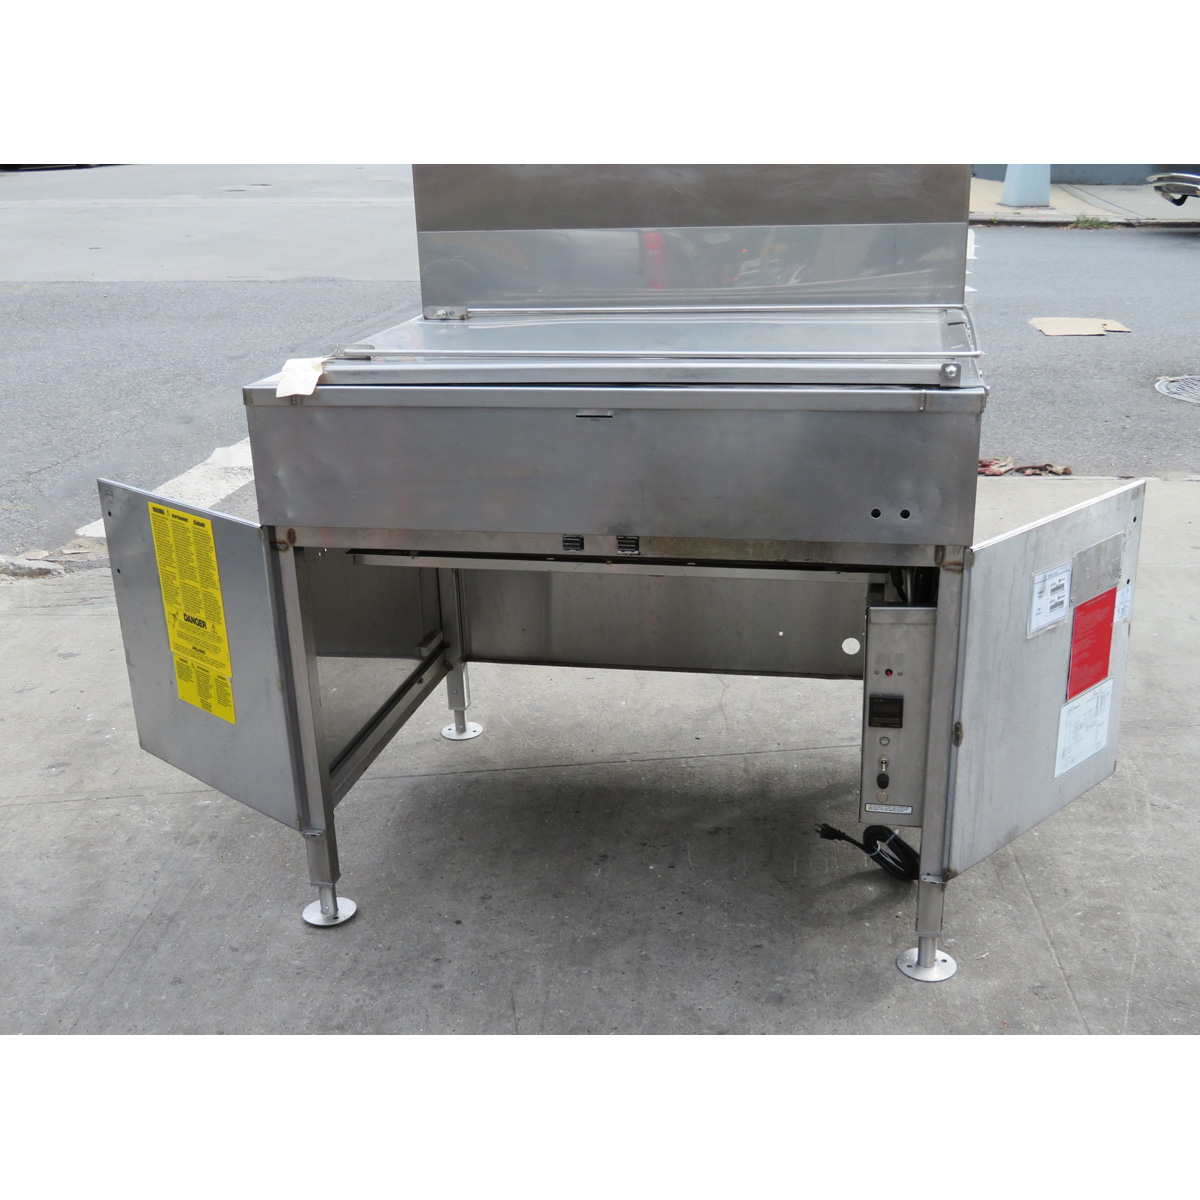 Belshaw Adamatic 734CG Natural Gas Donut Fryer, Used Very Good Condition image 3